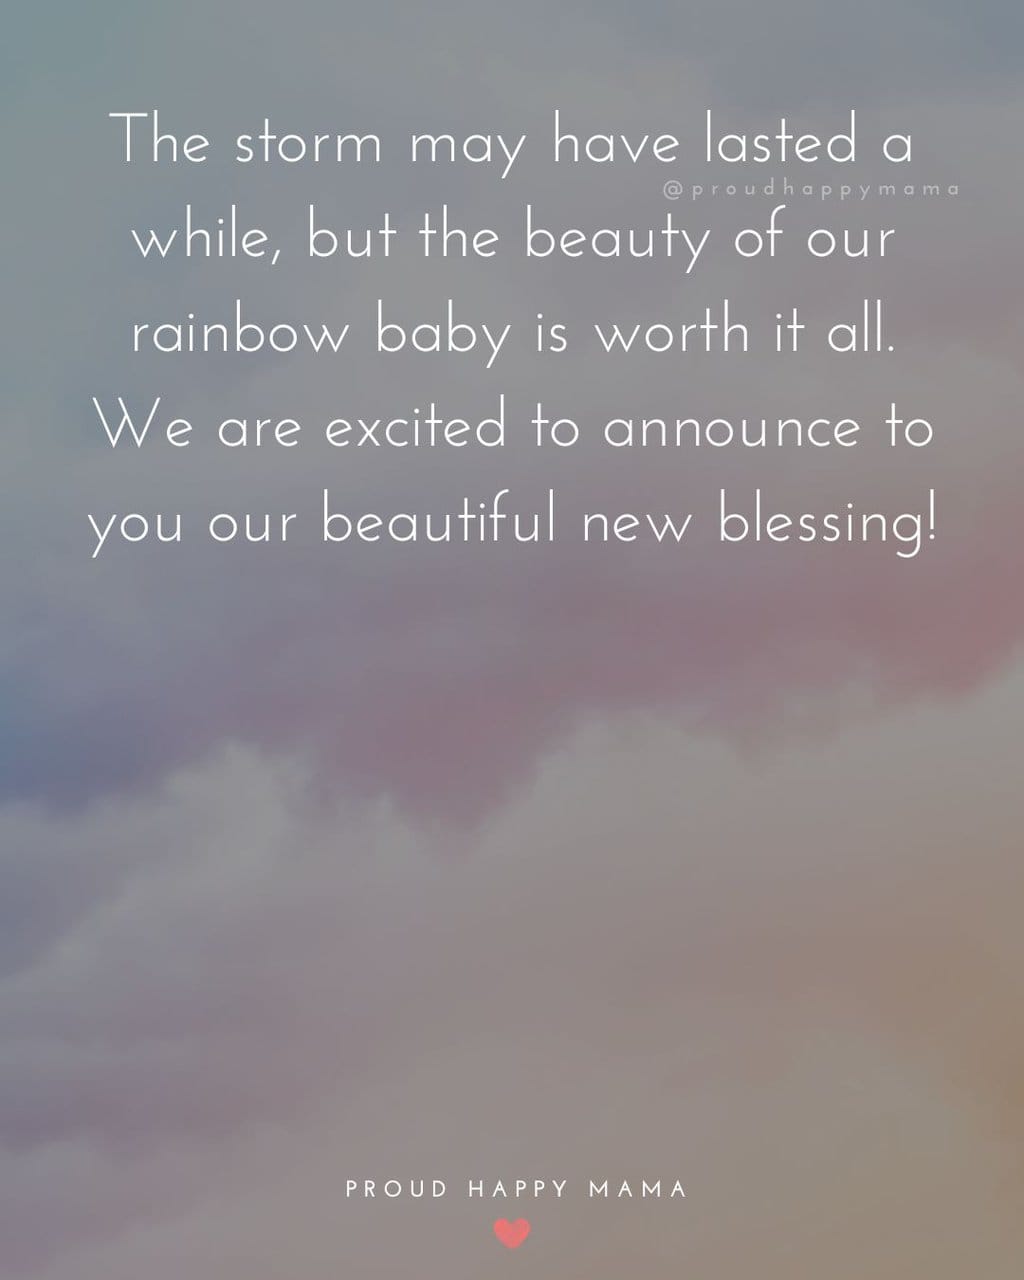 Ranibow-baby-quote-The-storm-may-have-lasted-a-while-but-the-beauty-of-our-rainbow-baby-is-worth-it-all.-We-are-excited-to-announce-to-you-our-beautiful-new-blessing